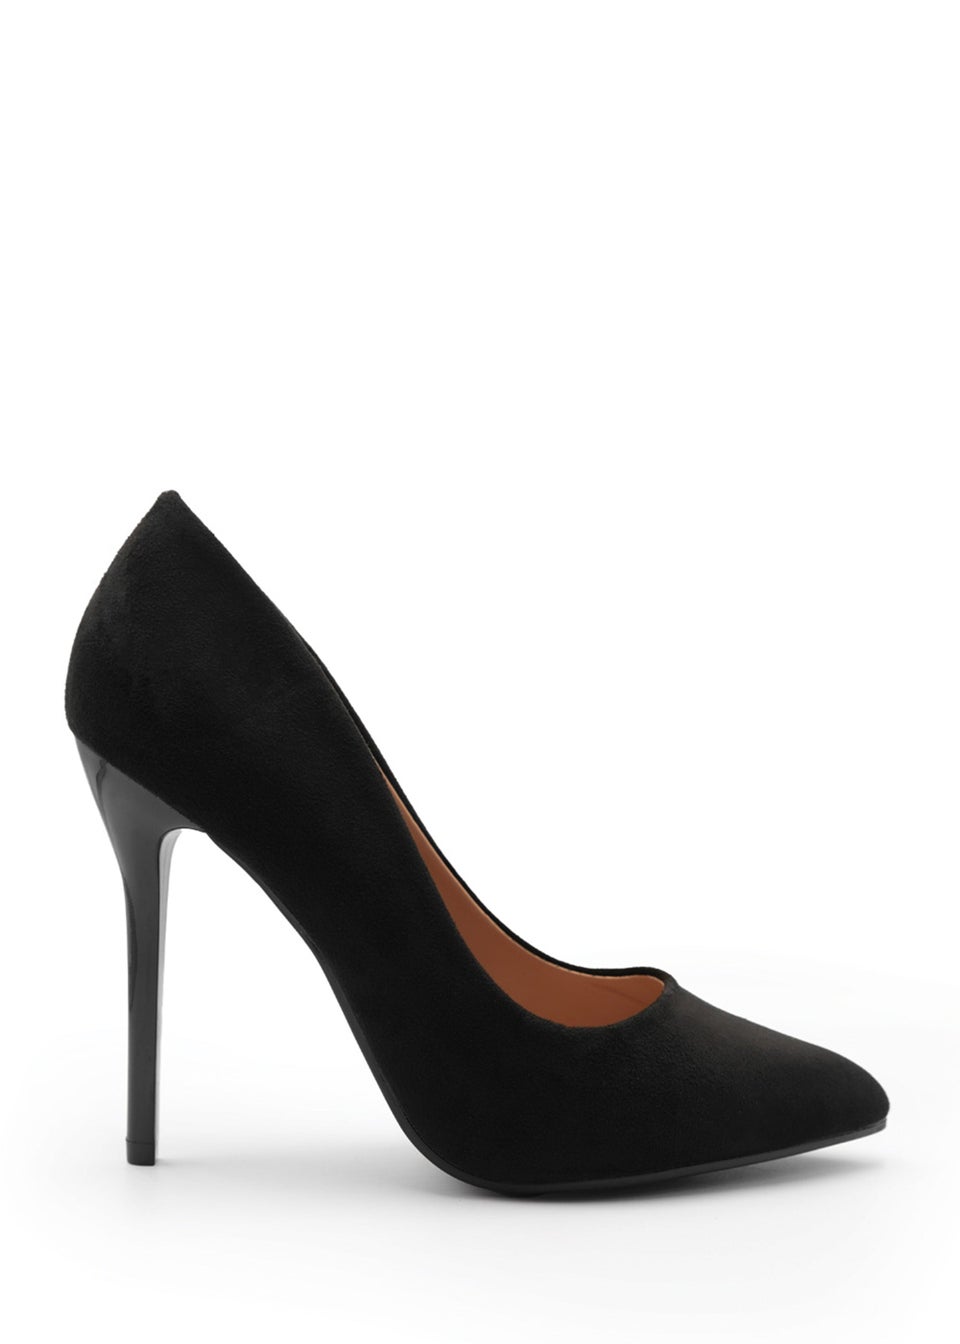 Where's That From Kyra Black Suede High Heel Pumps